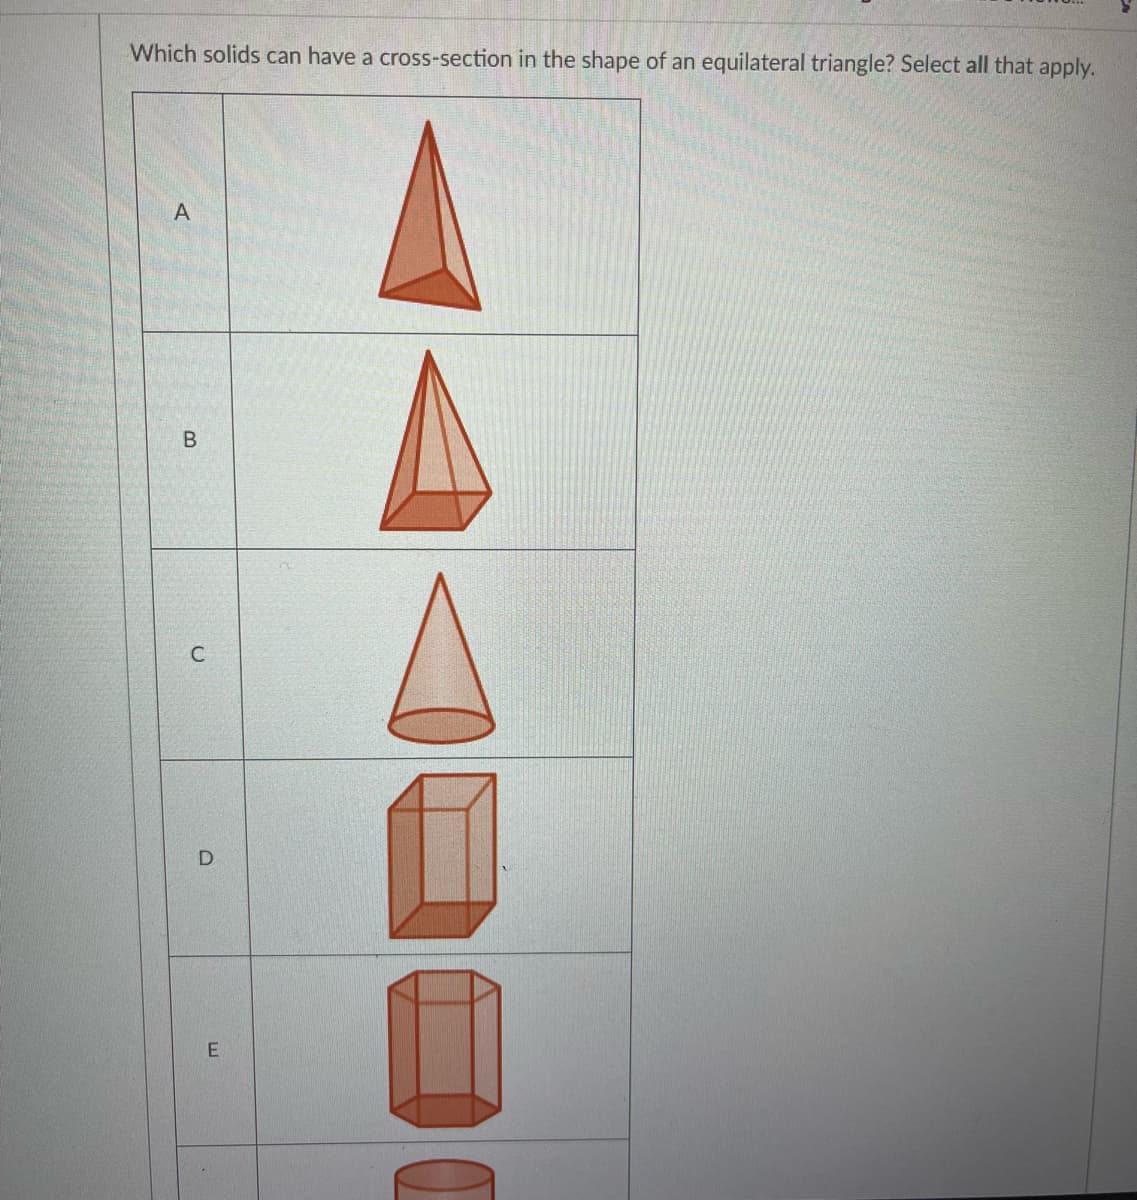 Which solids can have a cross-section in the shape of an equilateral triangle? Select all that apply.
A
